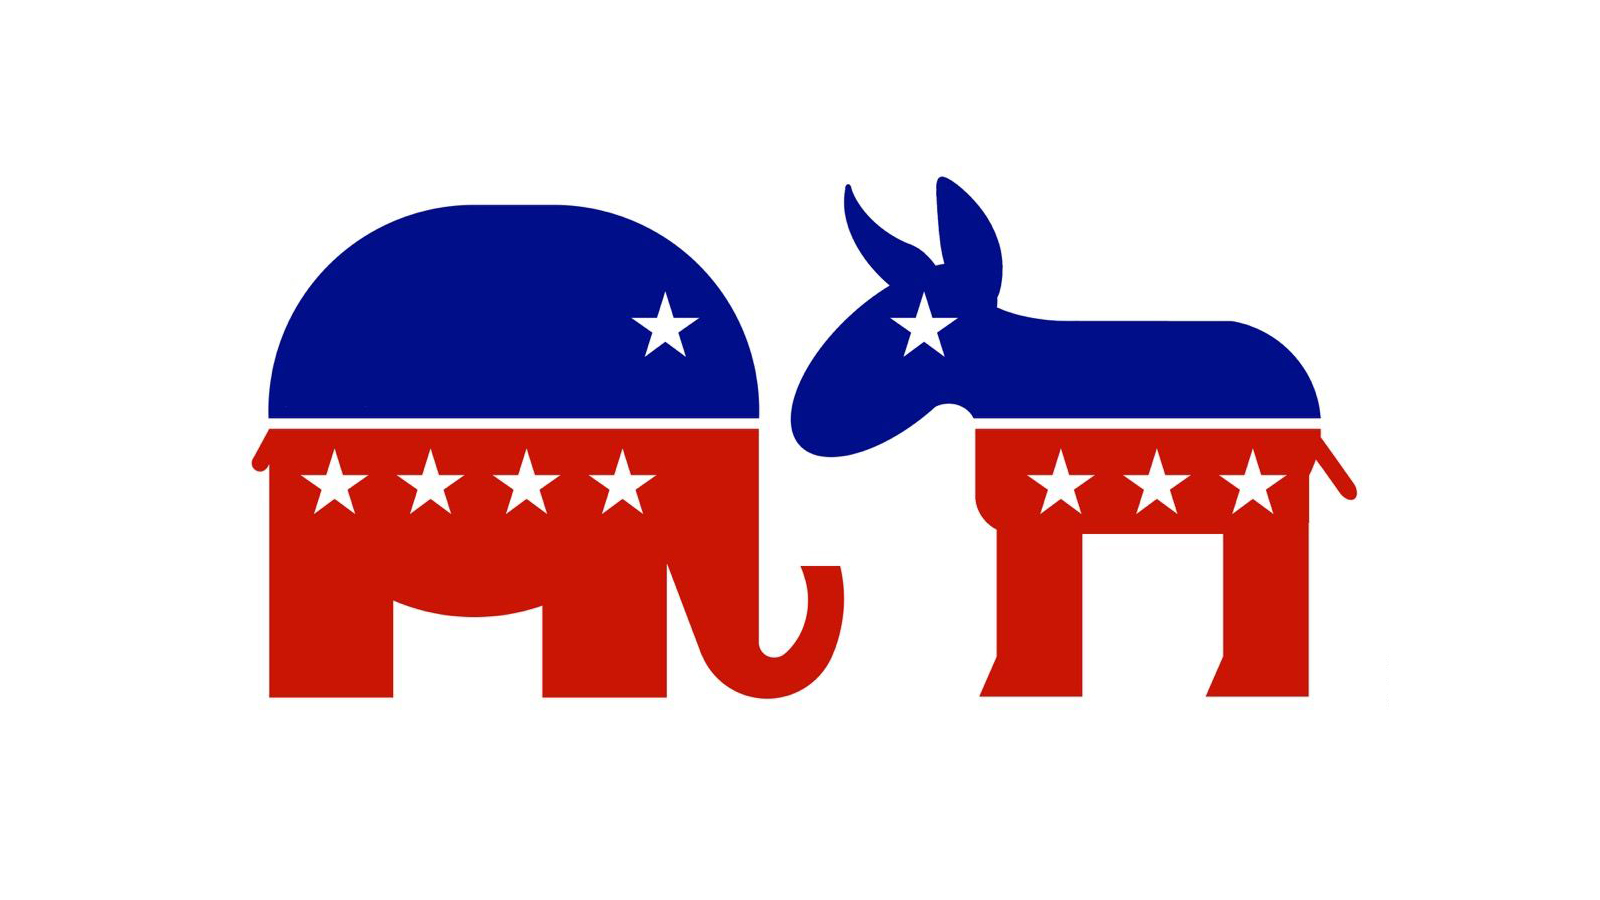 Why Democrats are donkeys and Republicans are elephants - CNN Style